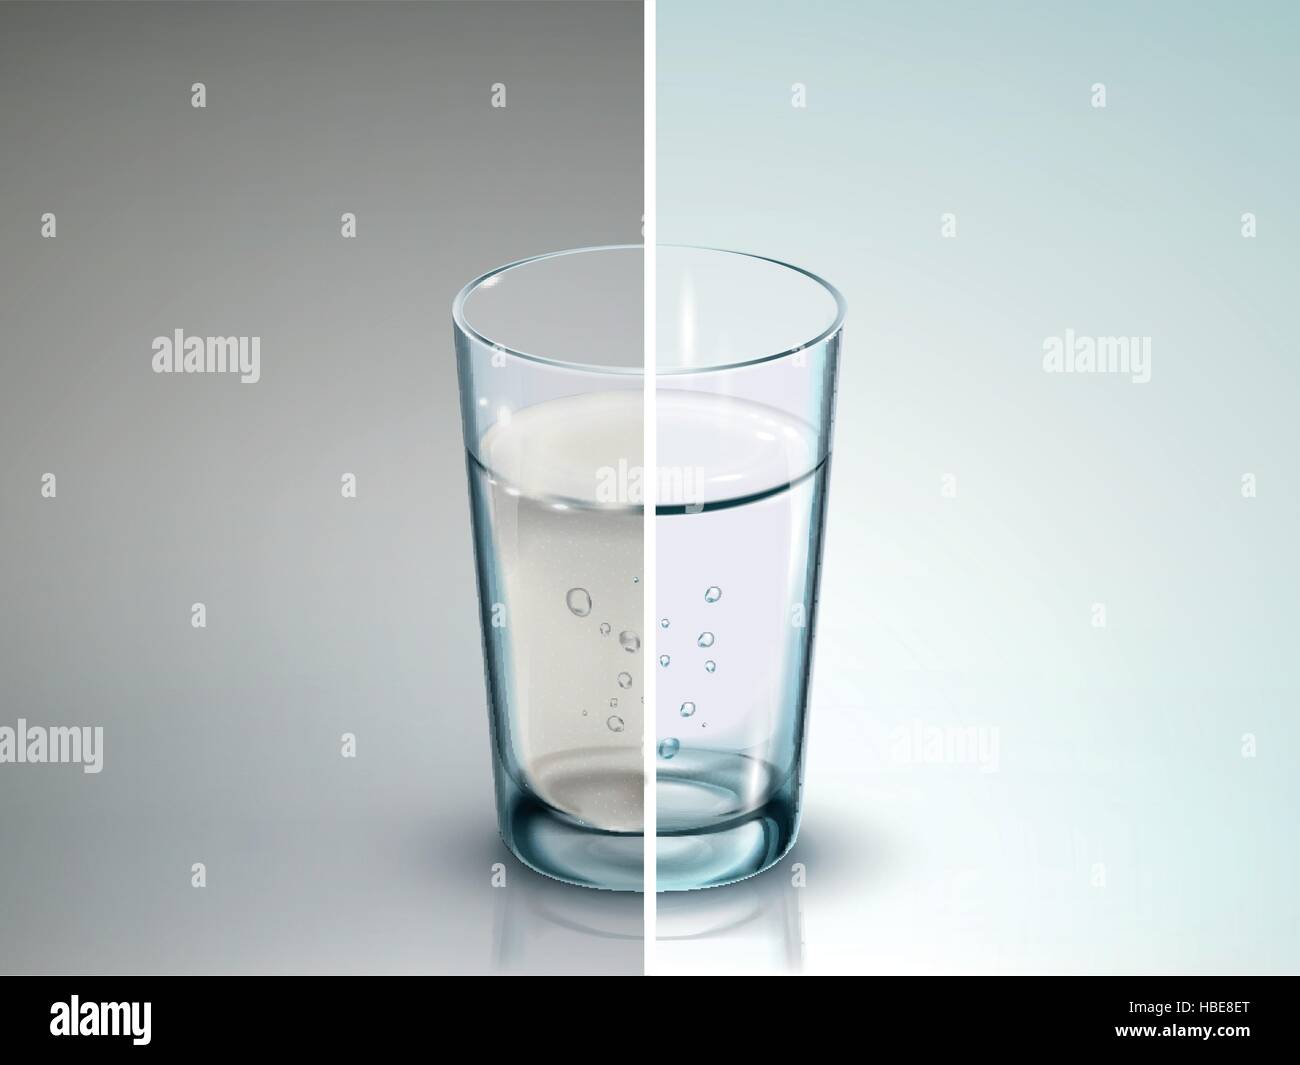 comparison of two glasses of water - 3D illustration Stock Vector